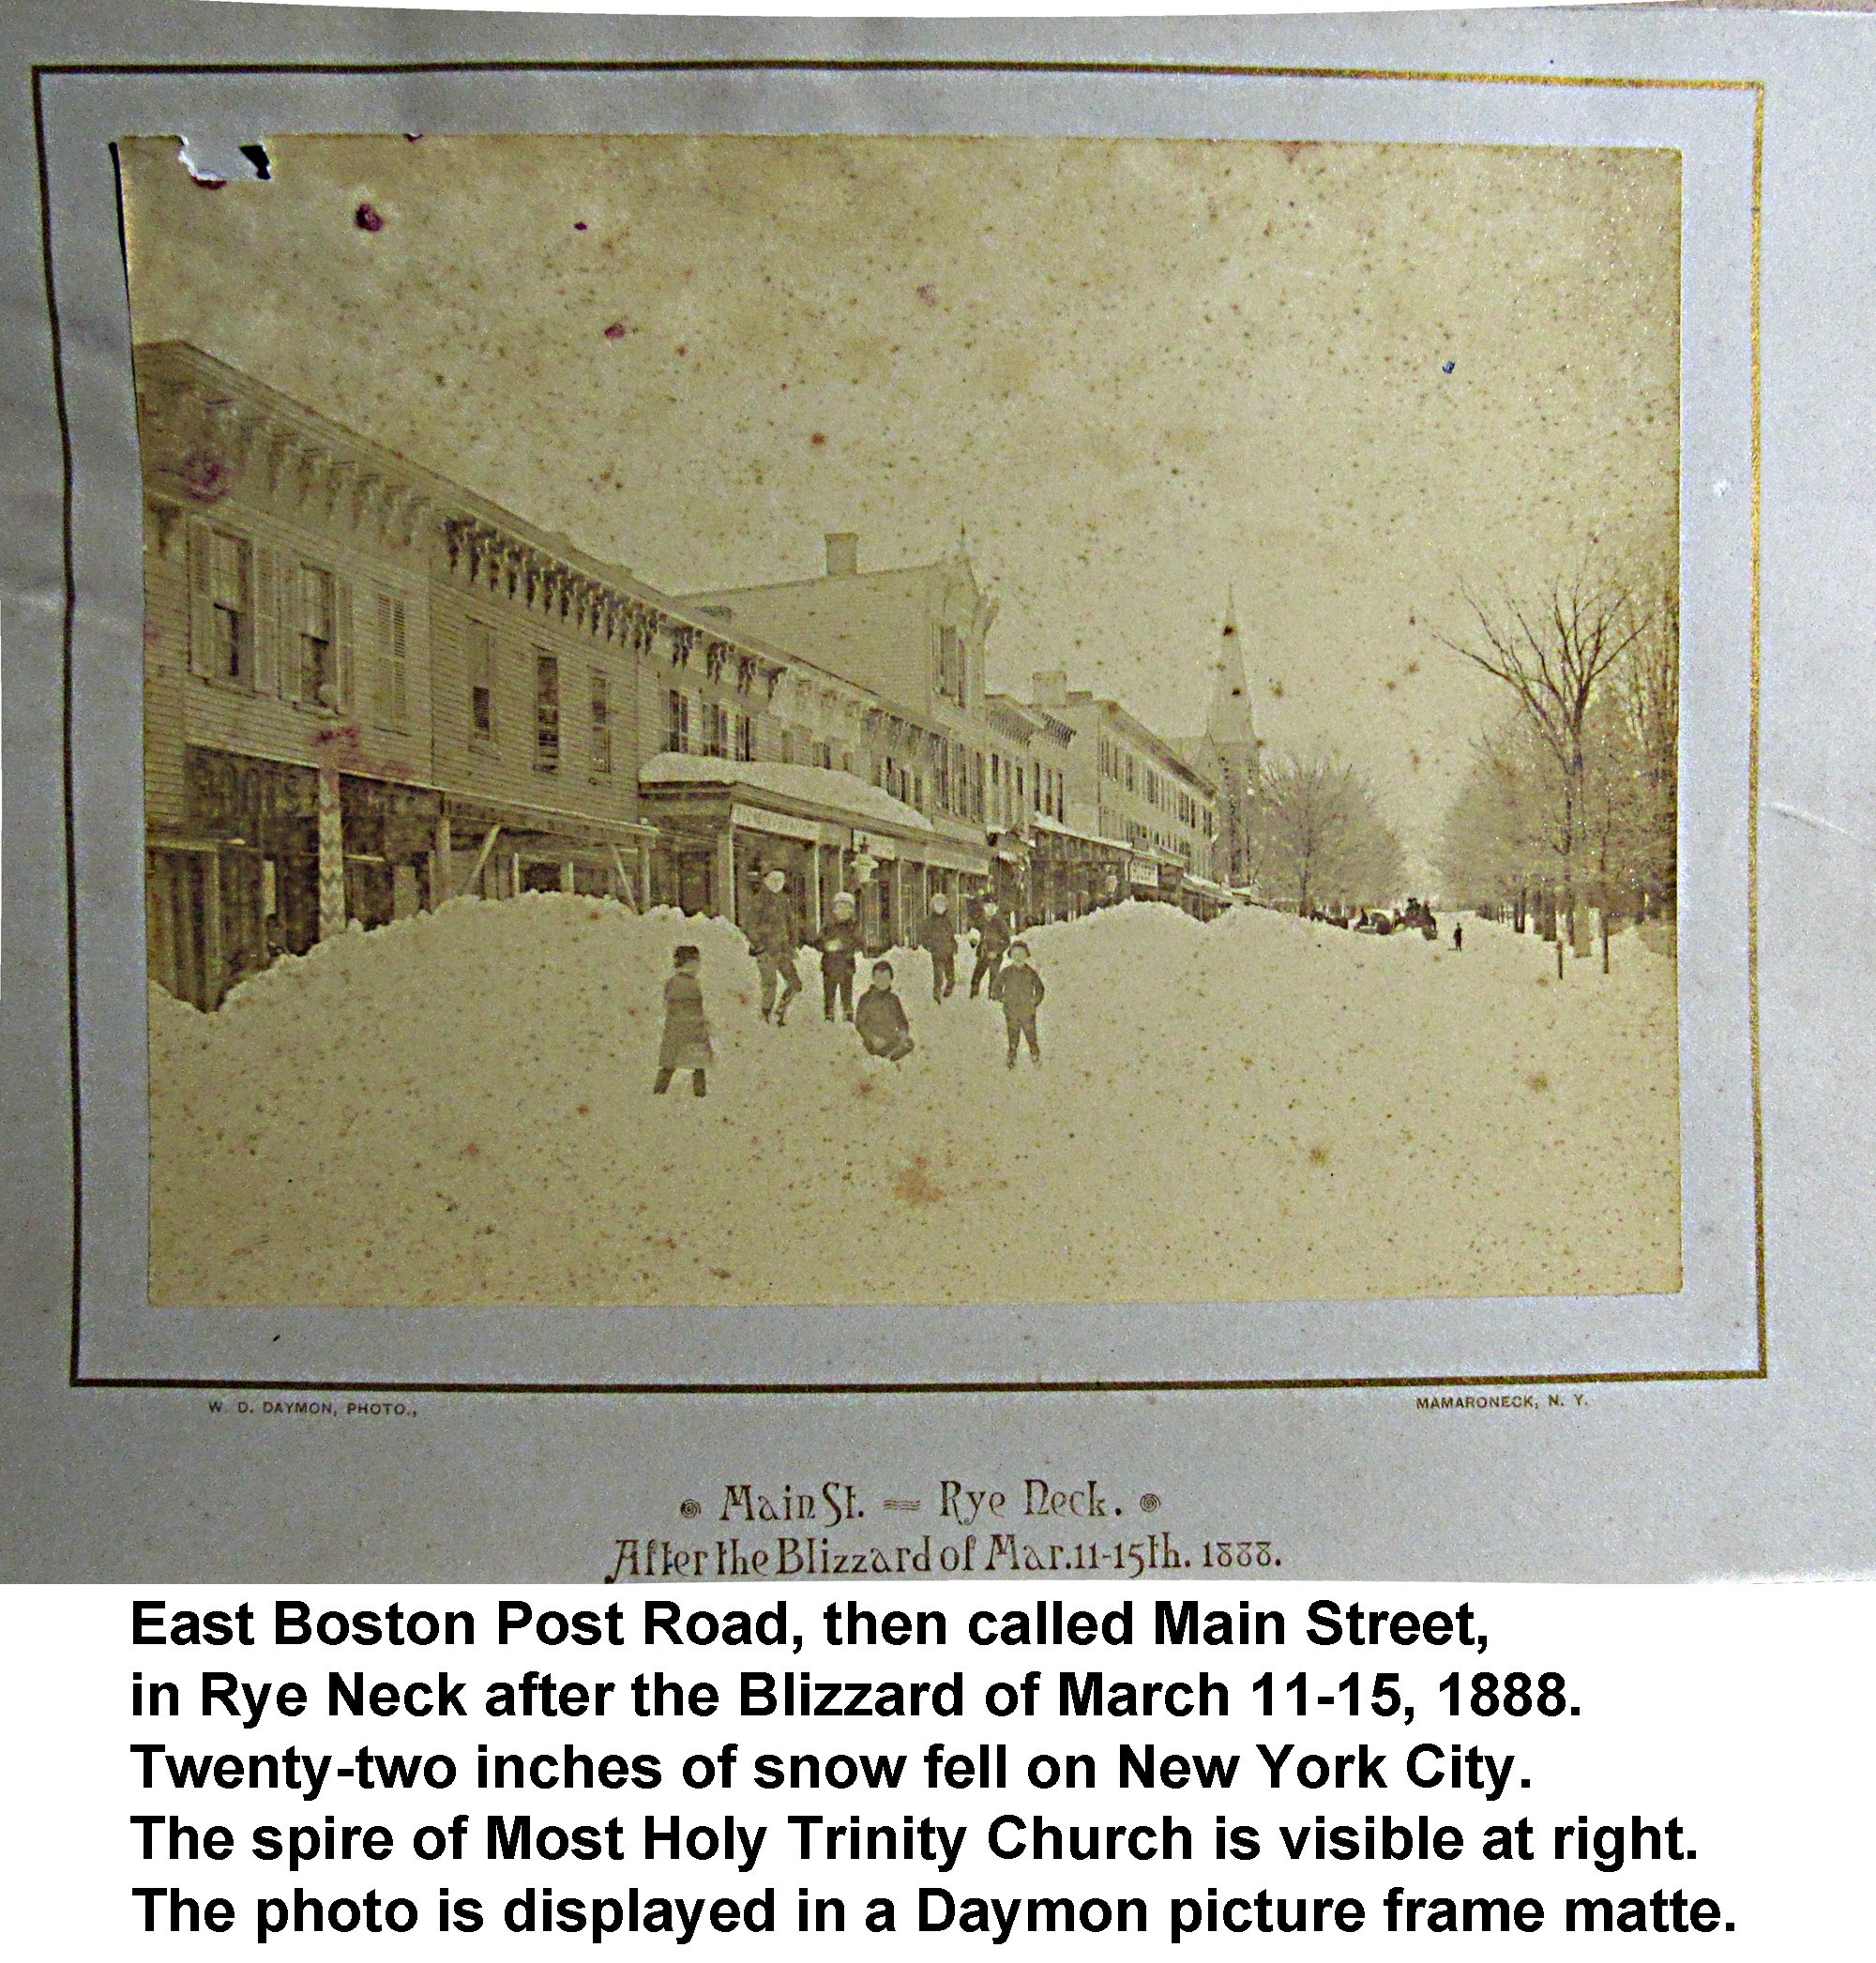 WD-05 Blizzard of 1888 East Post Road in Rye Neck captioned.jpg